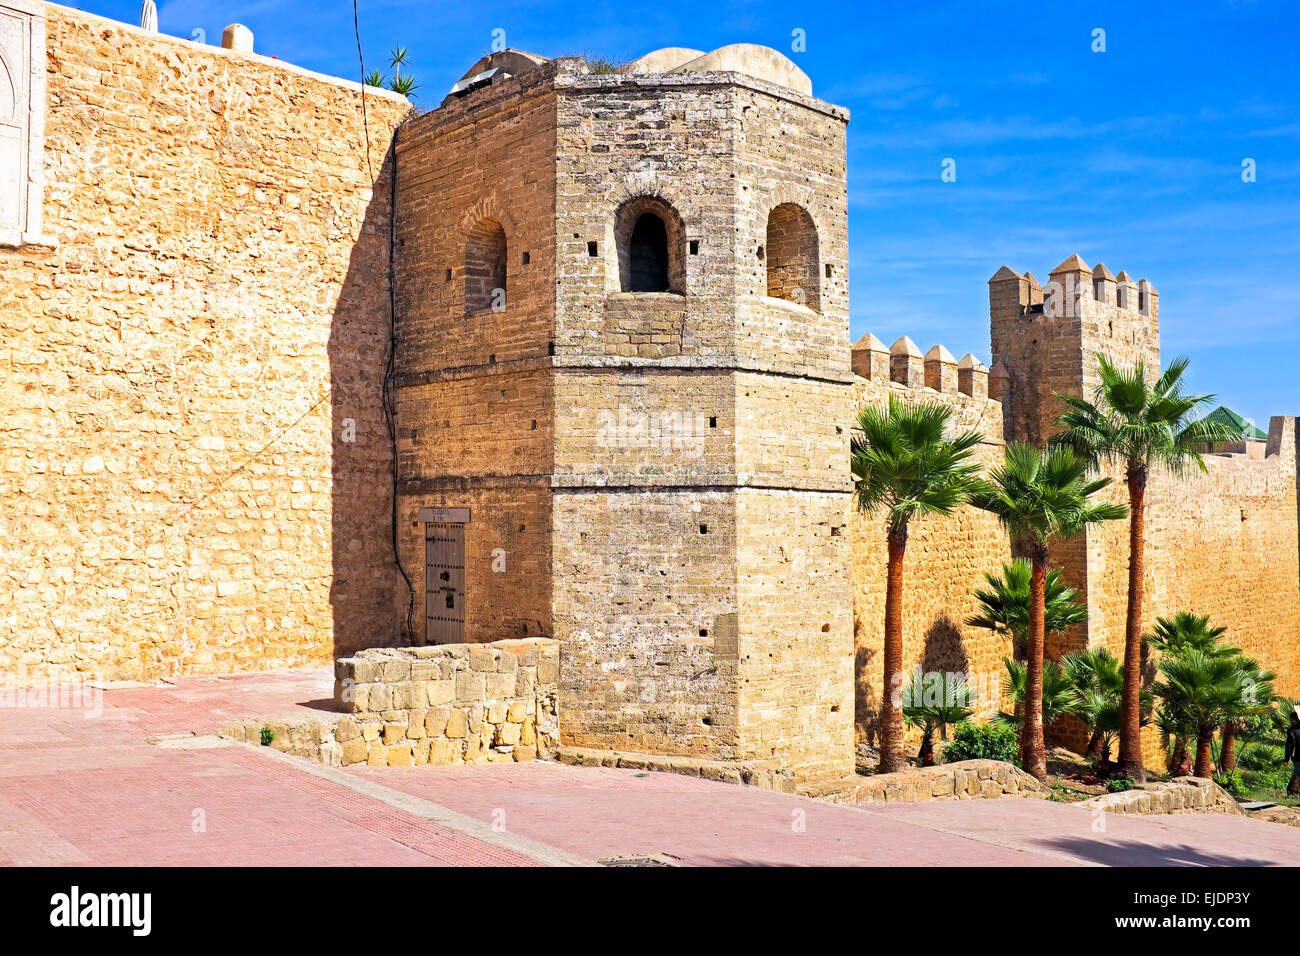 Old city walls in Rabat, Morocco Stock Photo